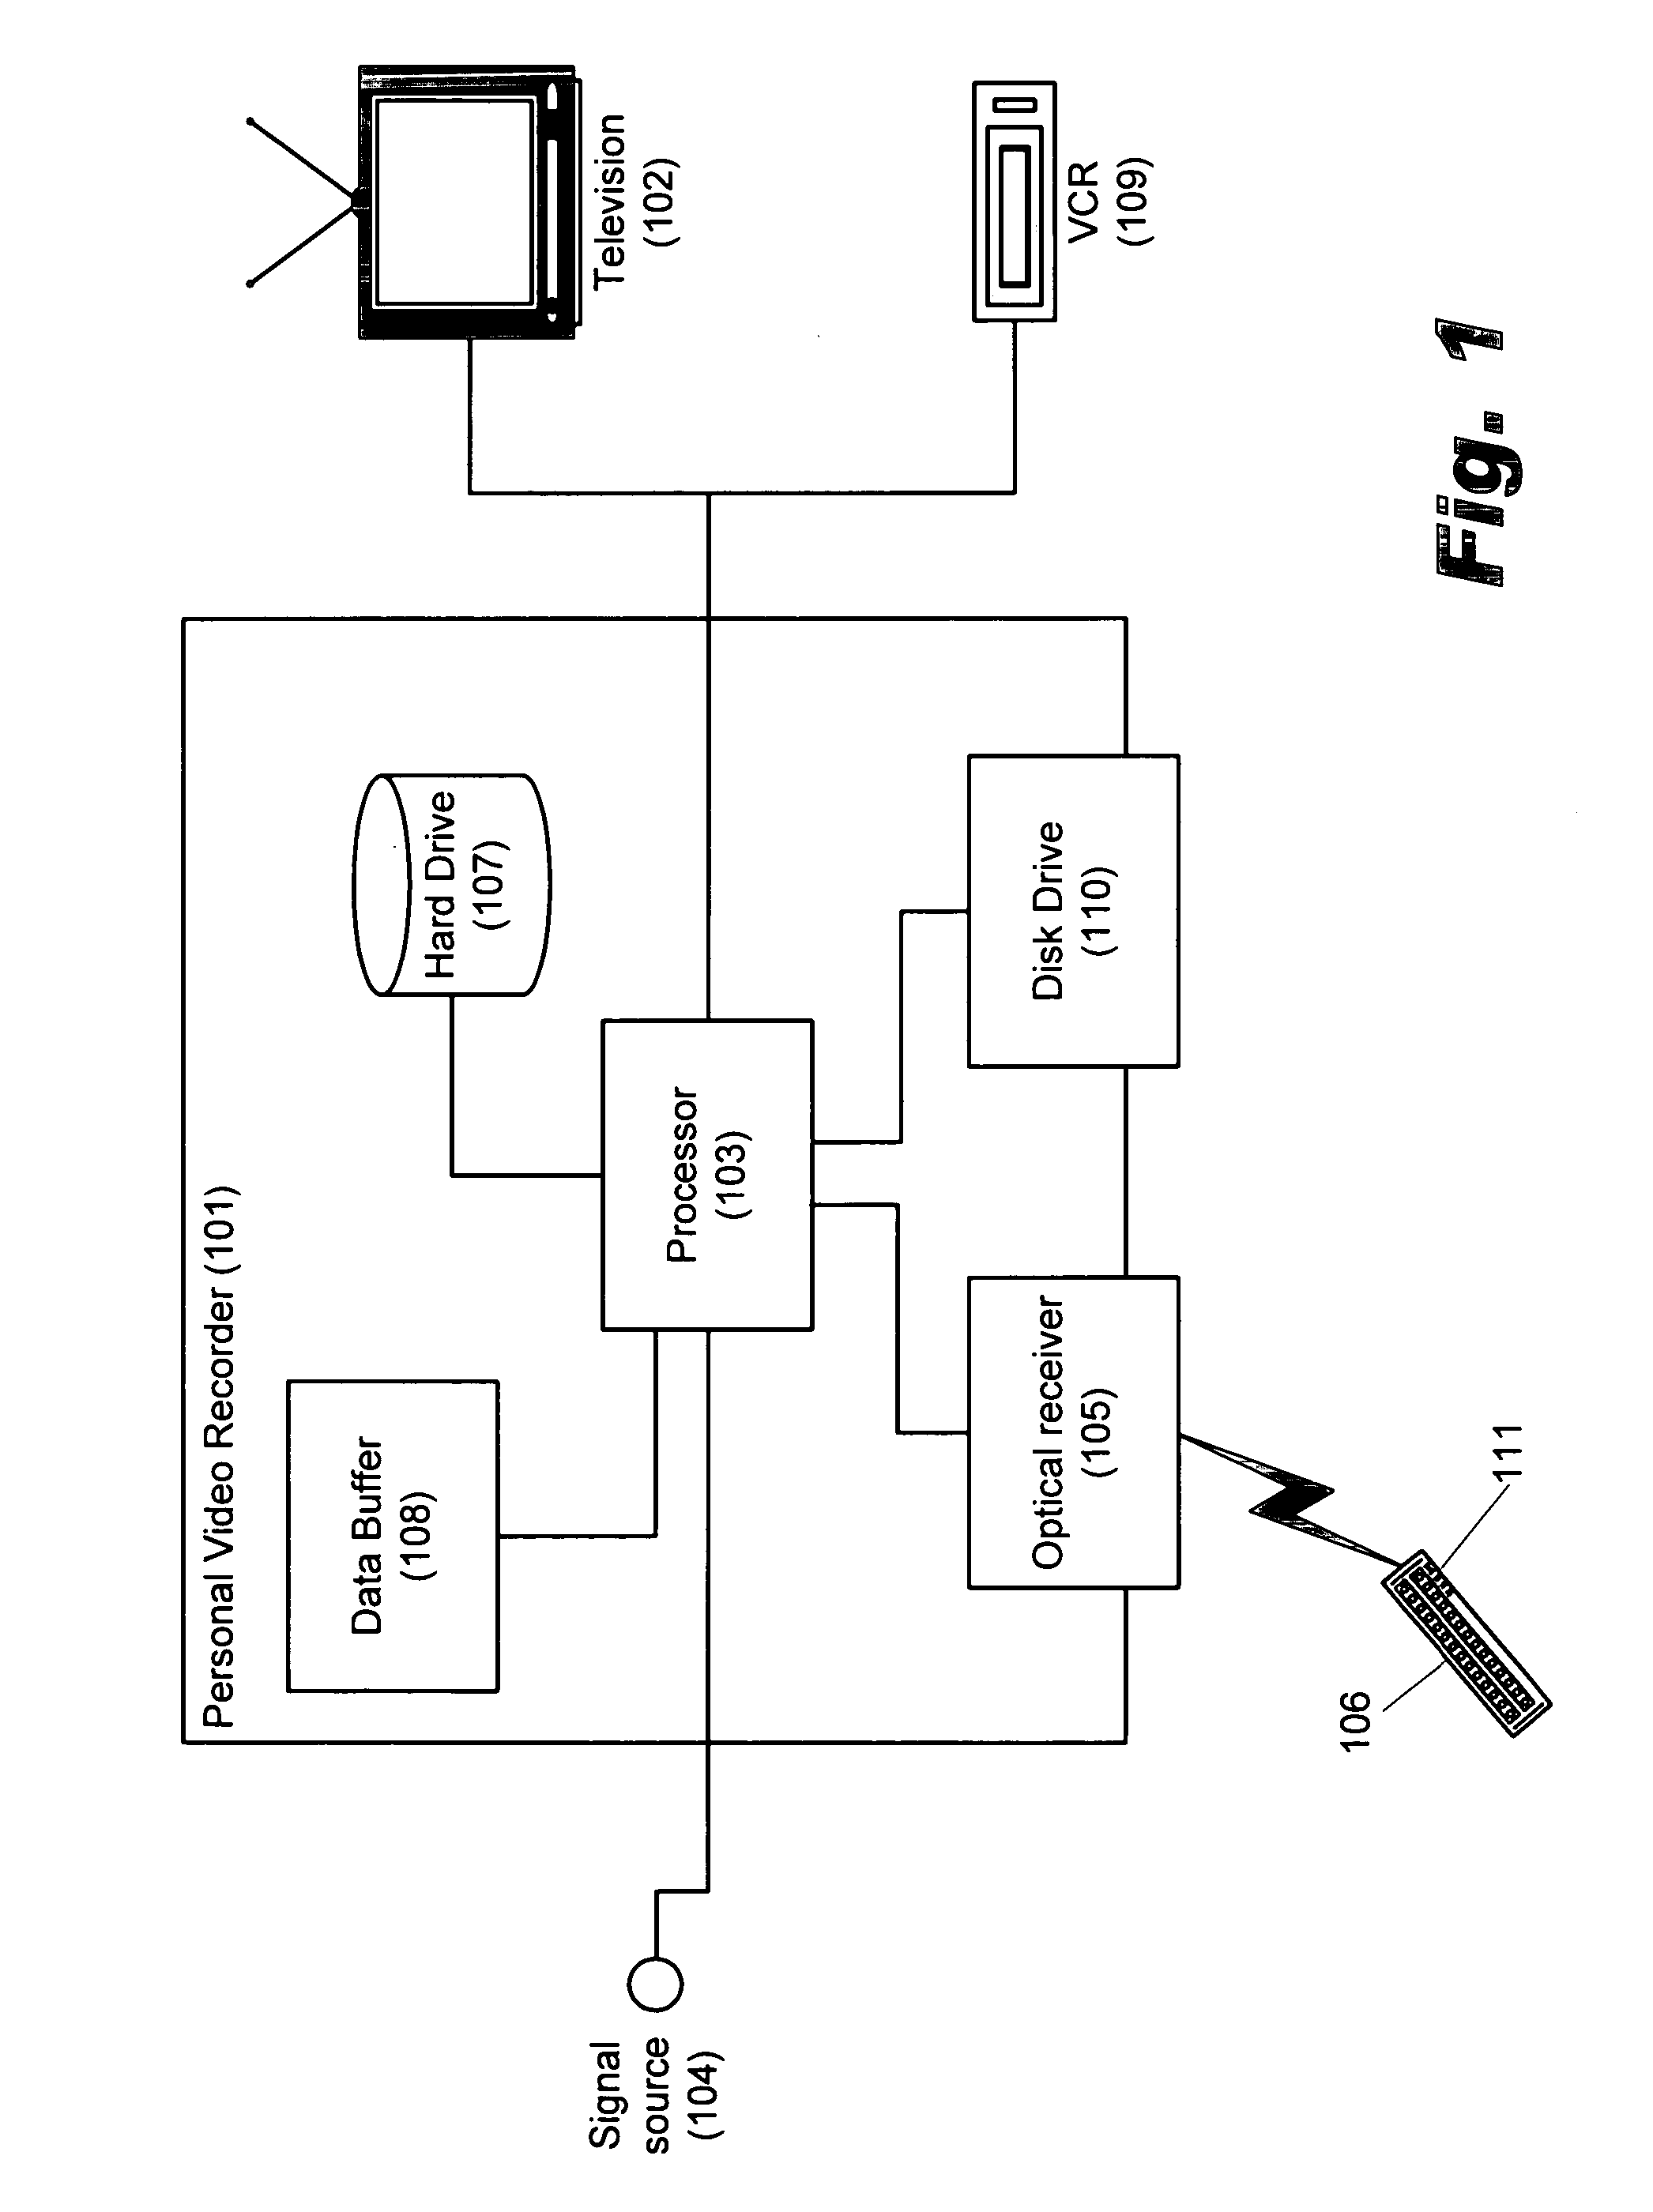 Method and system for electronic capture of user-selected segments of a broadcast data signal